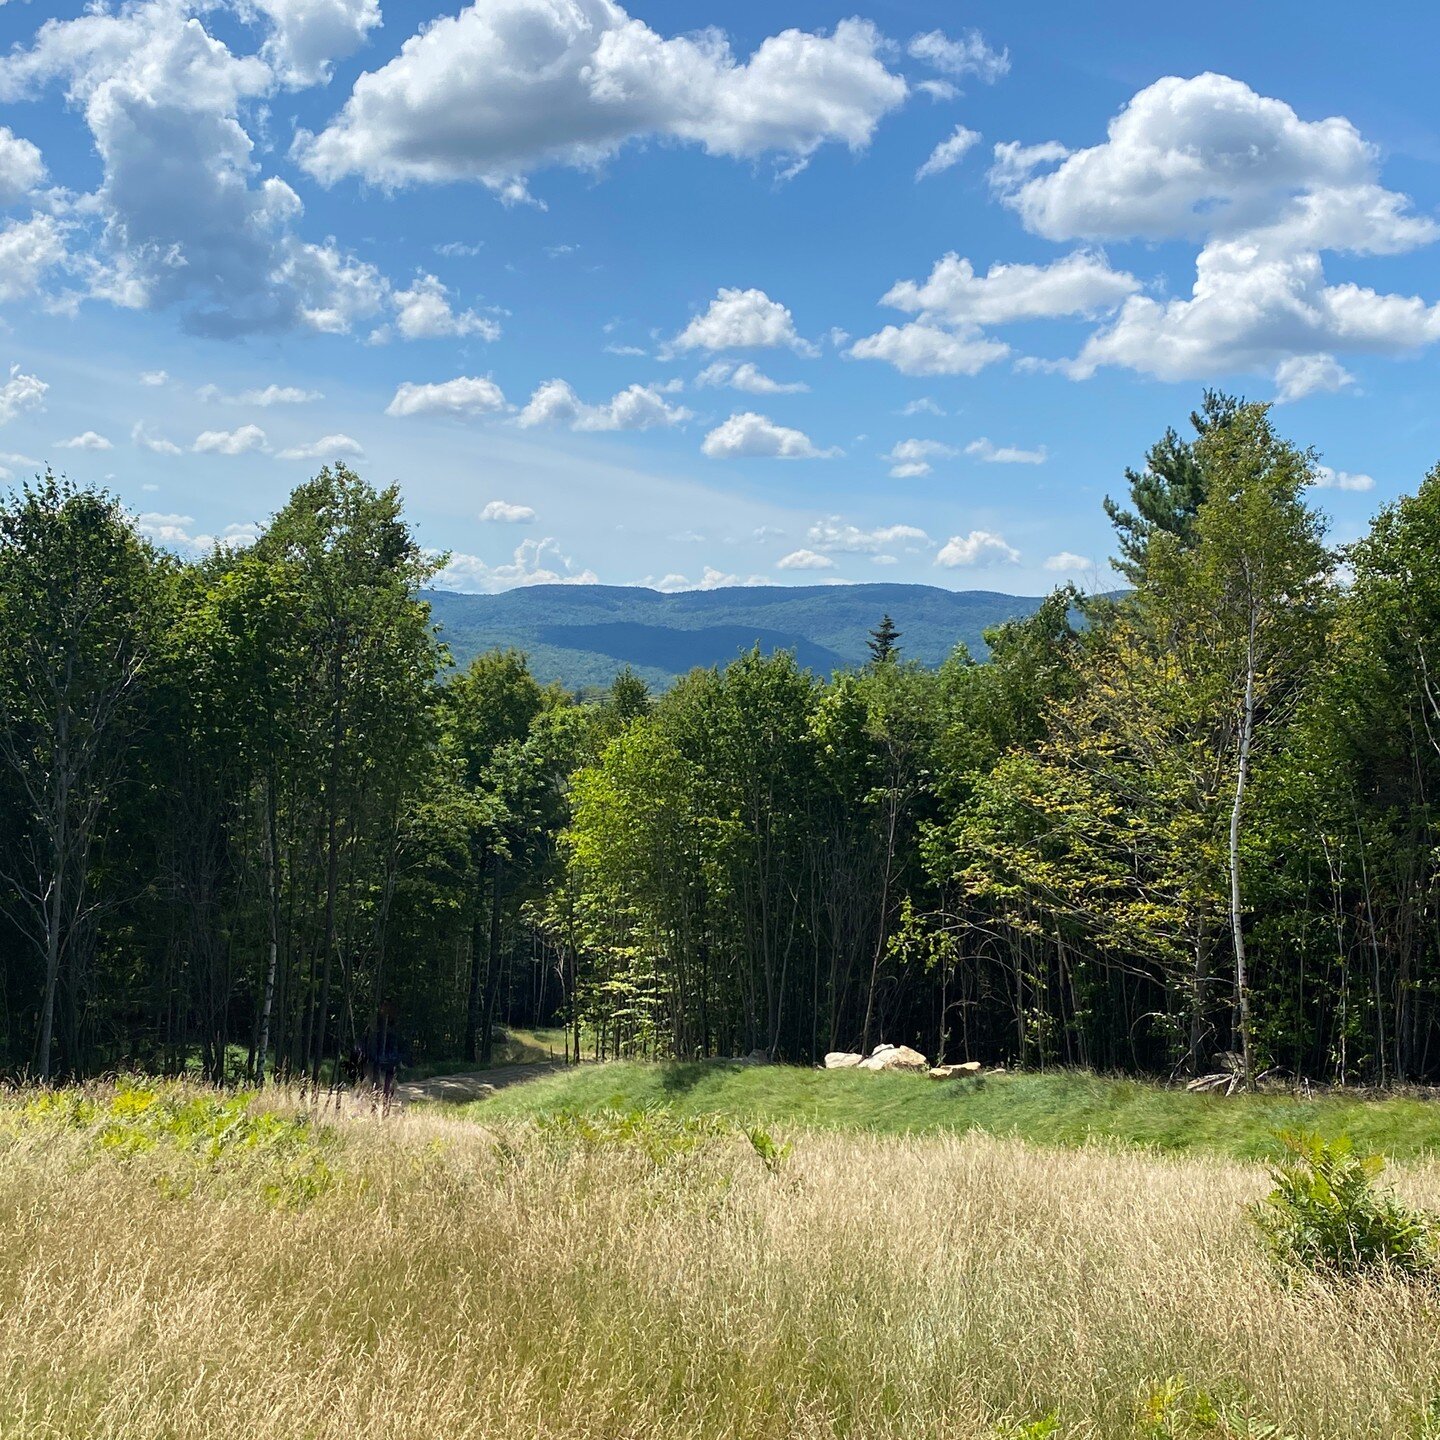 Excited to begin a new project in the Granite State with @bosurbanarchitecture! The view from the site is incredible: drawing from this context for our design will be challenging and rewarding.